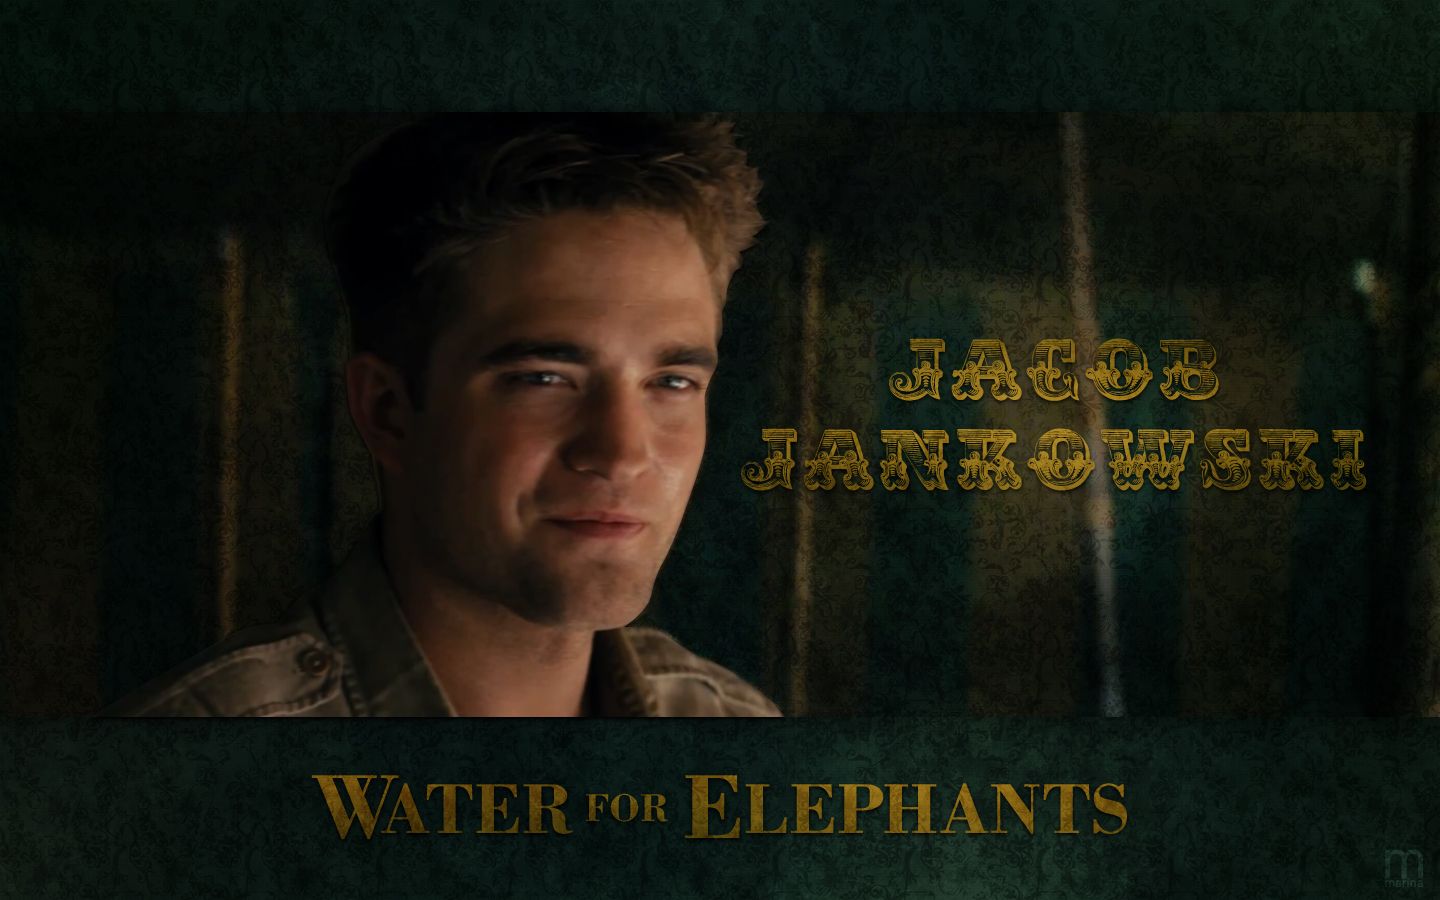 water for elephants wallpaper. MORE Water For Elephants